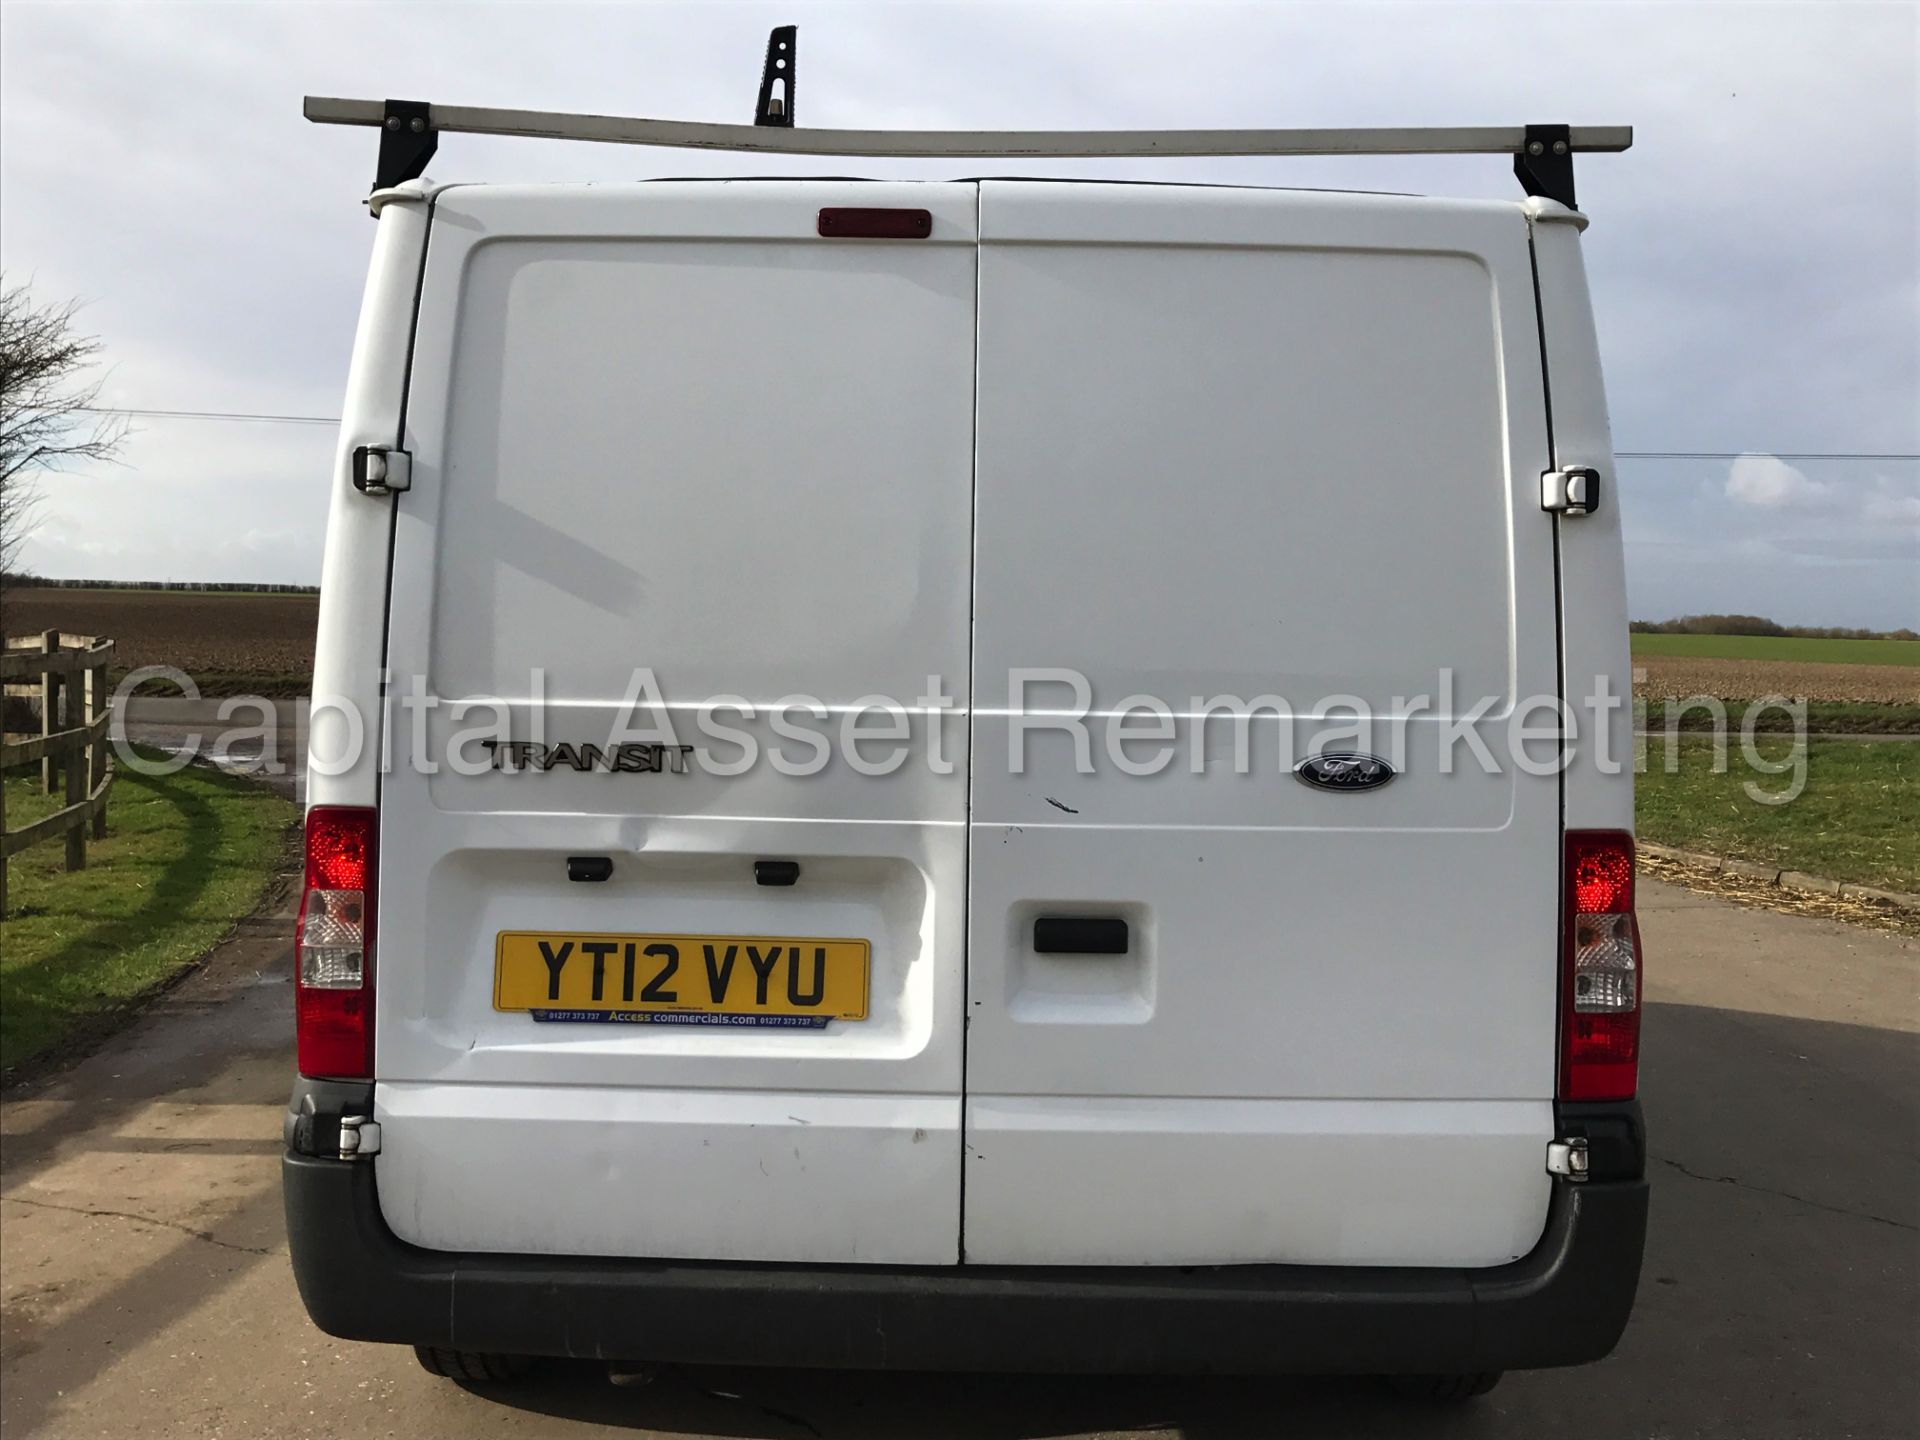 (On Sale) FORD TRANSIT 100 T280 FWD (2012) '2.2 TDCI - SWB - 100 PS - 6 SPEED' (1 FORMER KEEPER) - Image 7 of 19